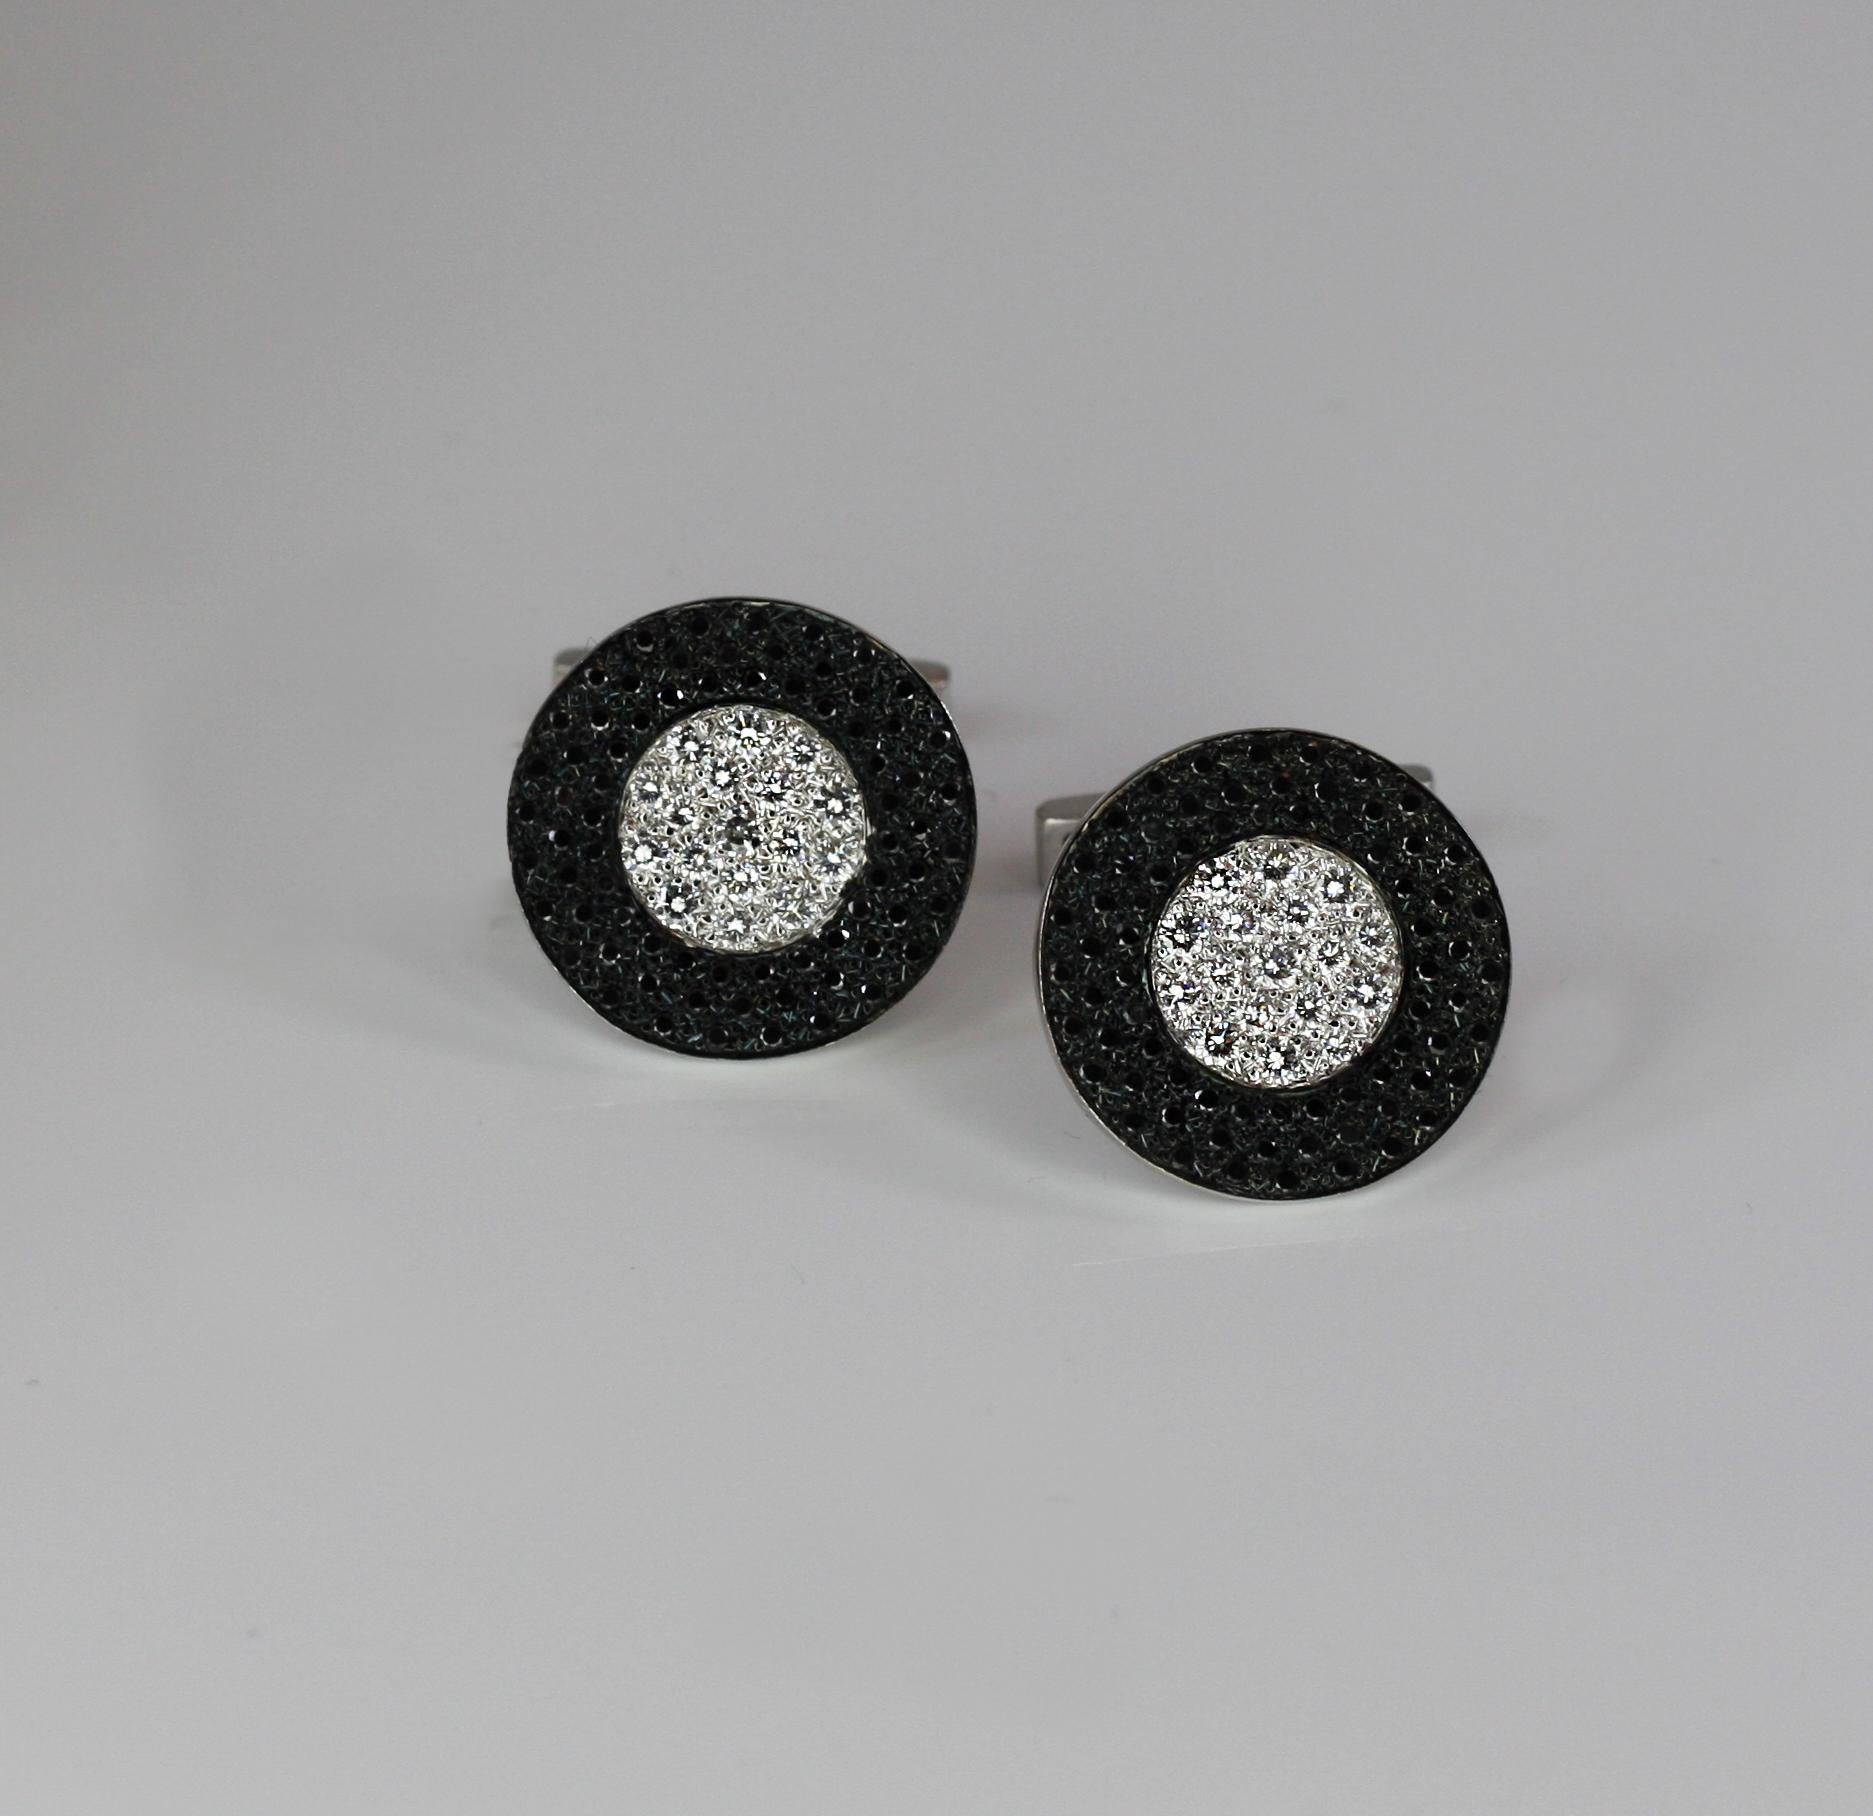 S.Georgios designer cufflinks handcrafted in Greece from 18 Karat white gold and decorated with 1.02 Carat brilliant cut white diamonds and 1.56 Carat brilliant cut black diamonds. 
These gorgeous pieces can be also ordered in all Yellow or Rose